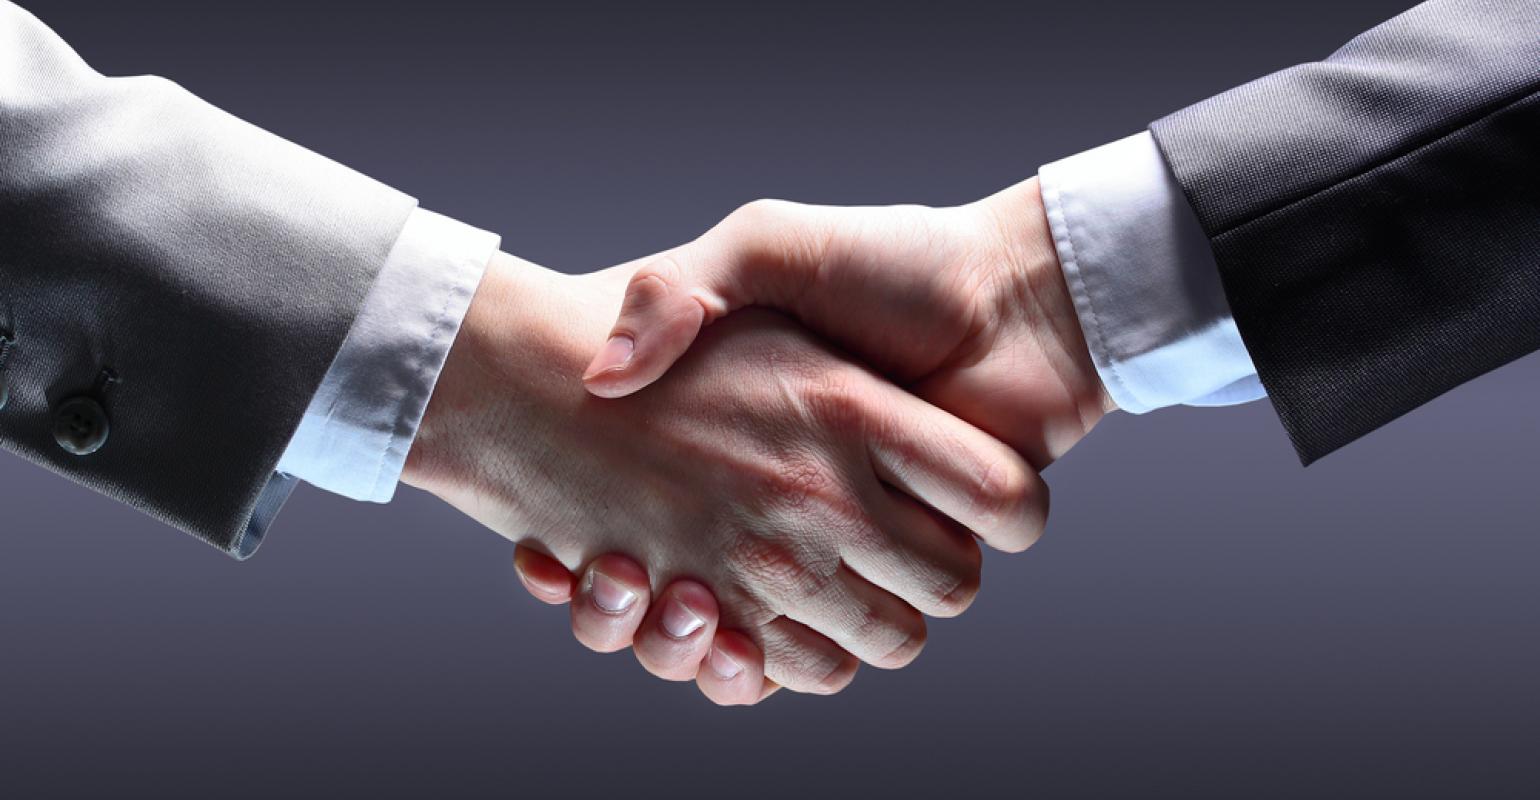 Handshake - it used to be a practice of shaking a person's hands to 

see if they carried any conceiled weapons in their sleeves. Later it 

became customary to shake each others' empty hands as a sign of no 

ill-will.